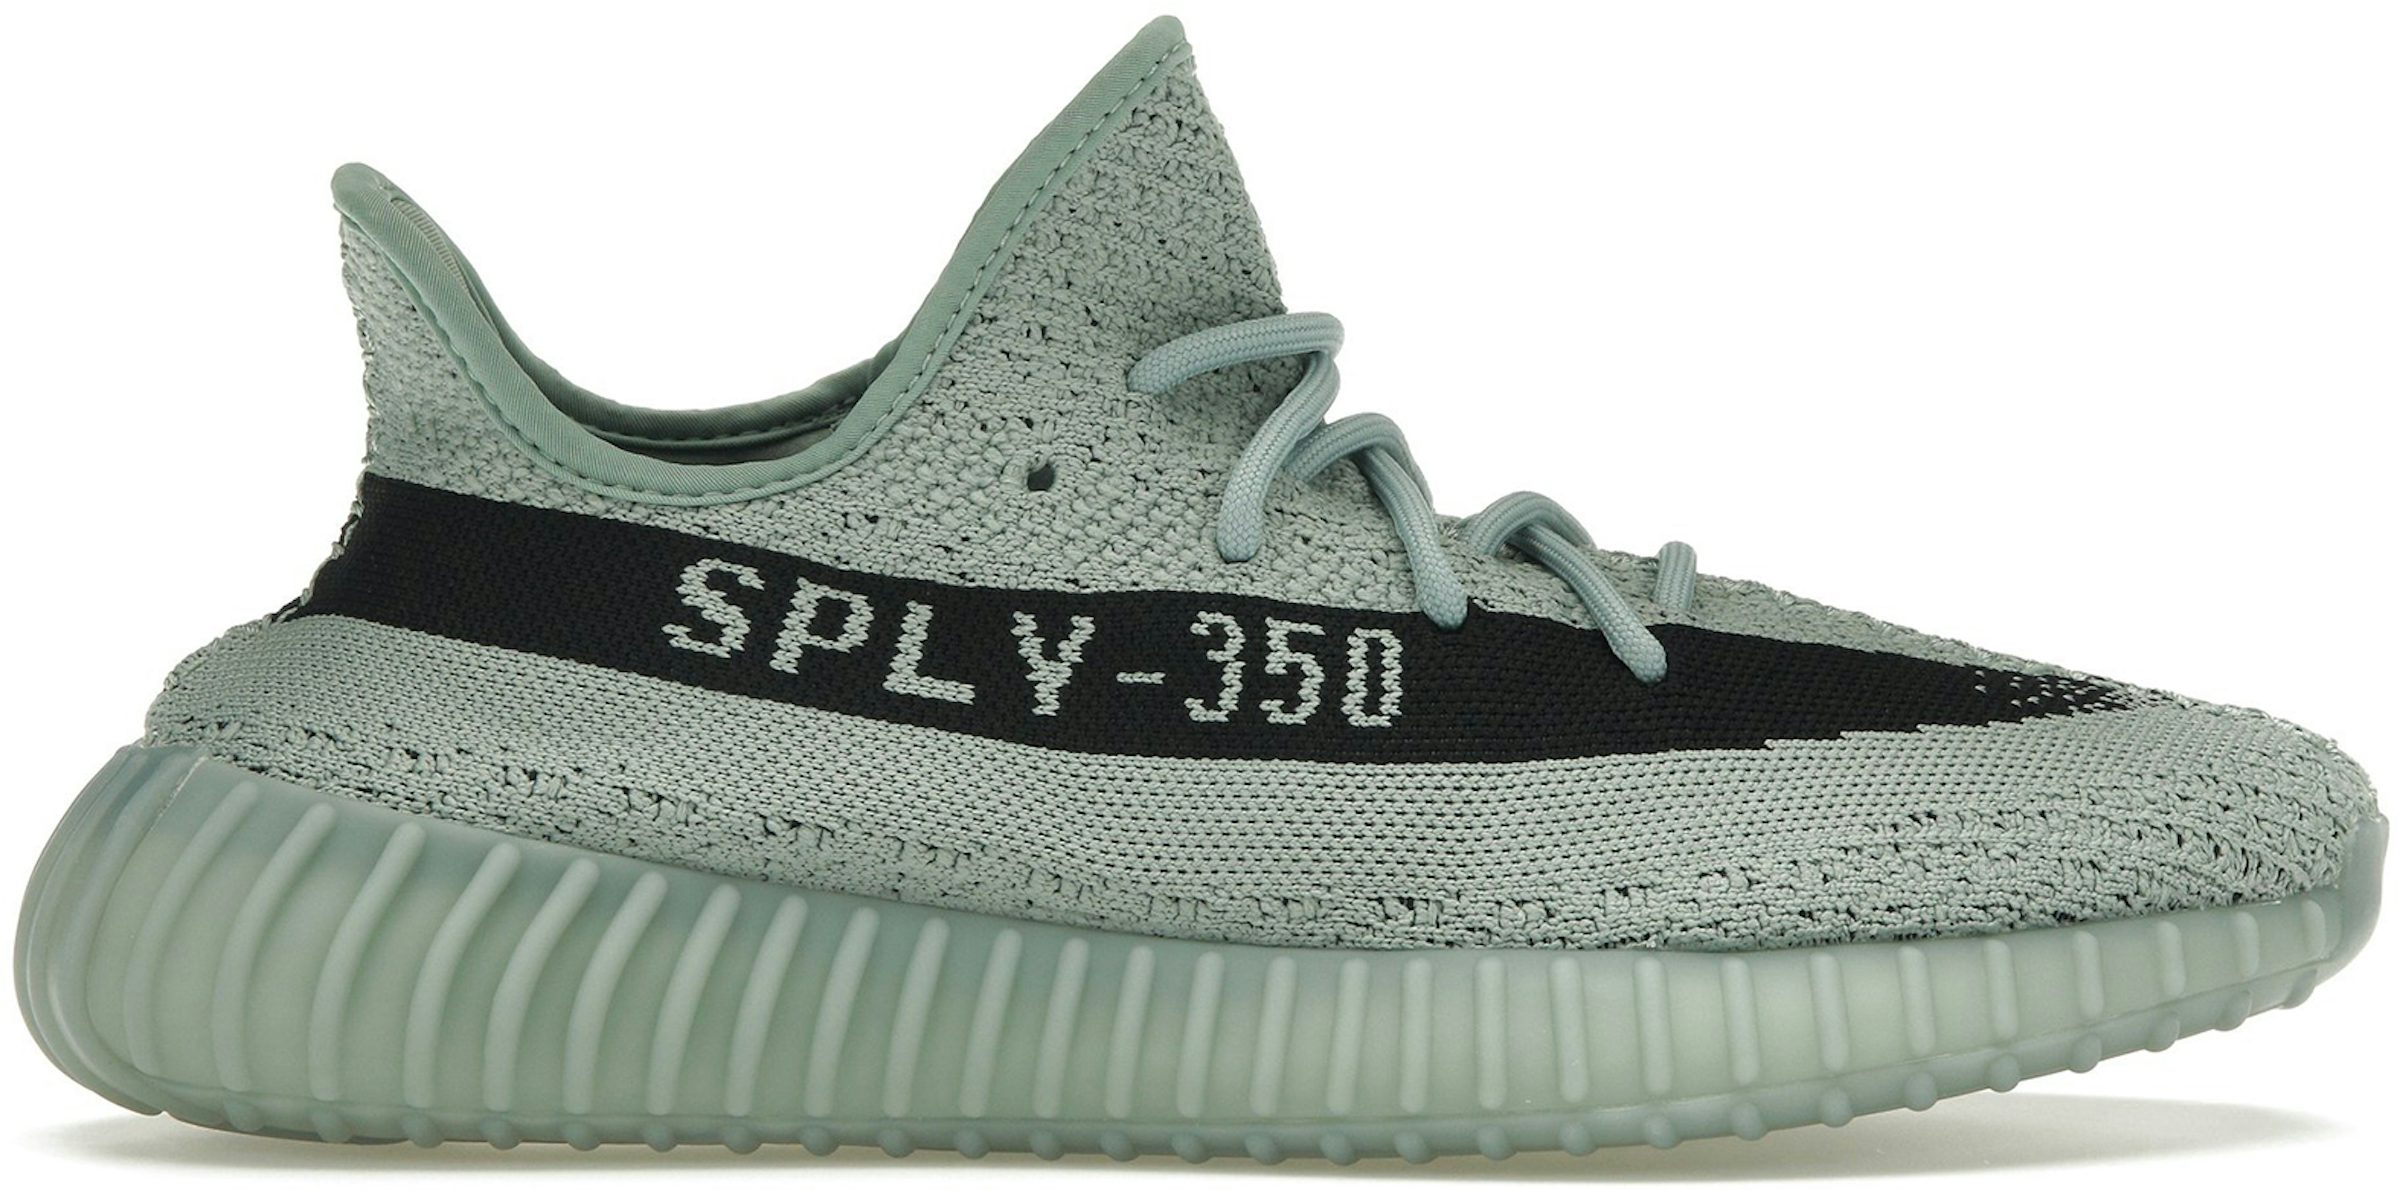 First Look at the 'Salt' Adidas Yeezy Boost 350 V2